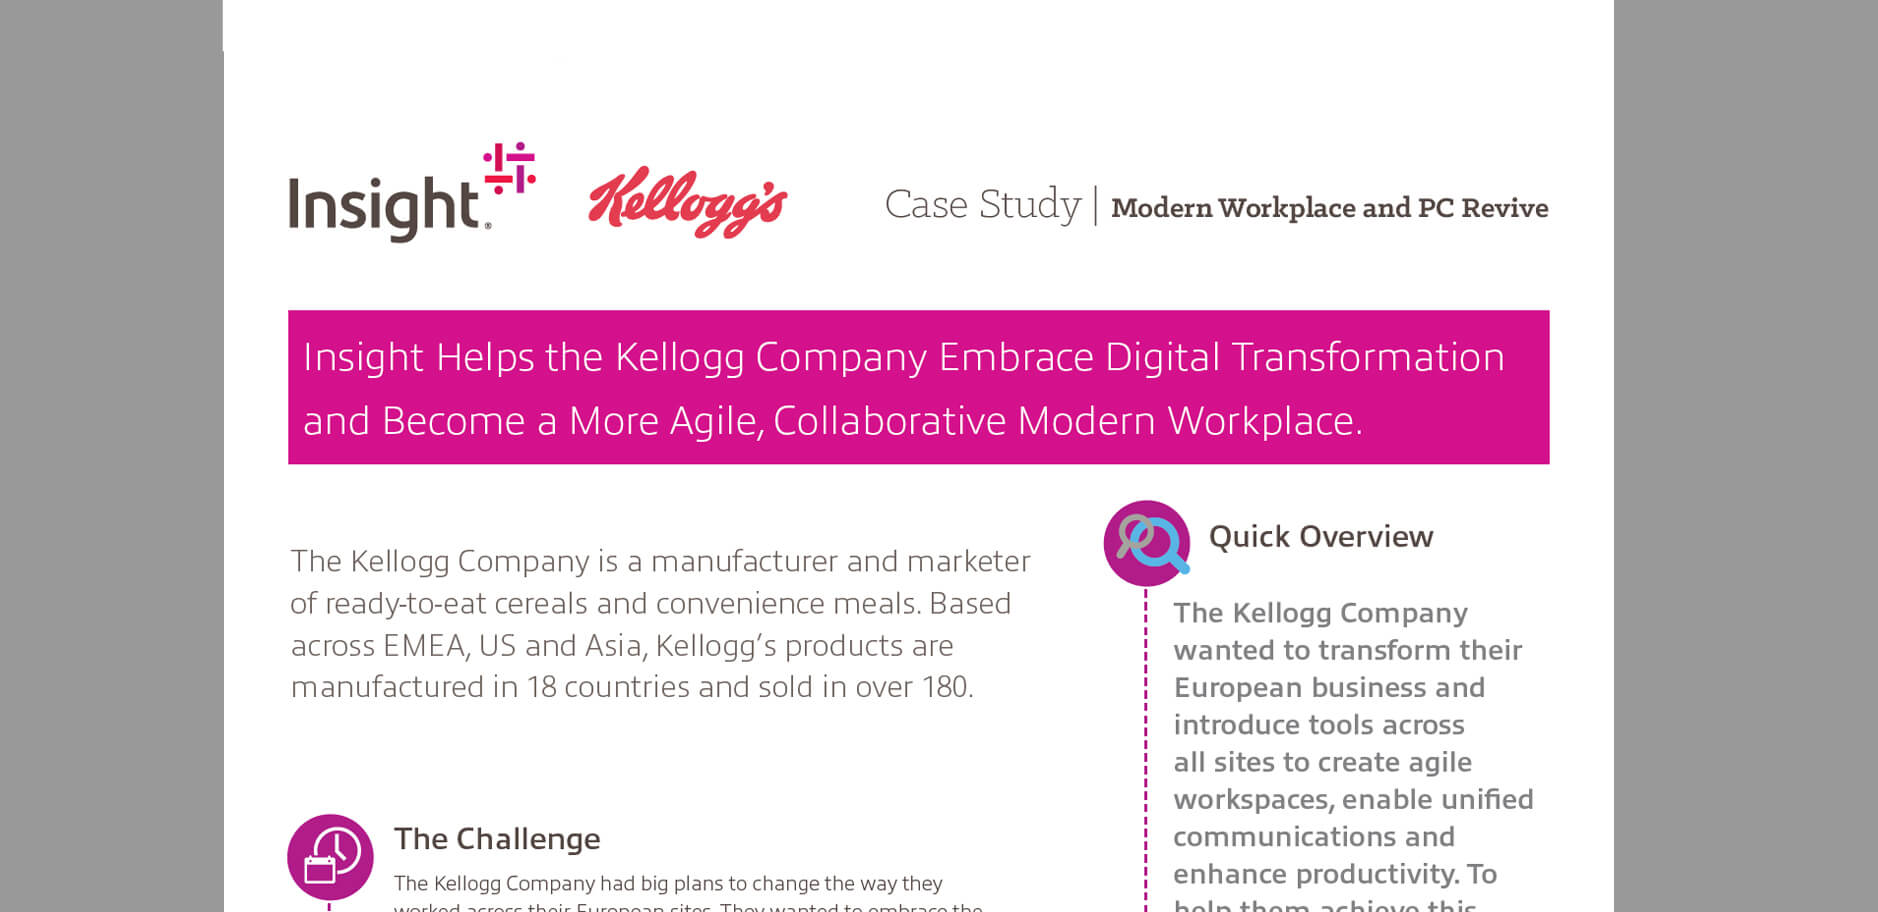 Learn how Insight helped Kellogg's become more agile